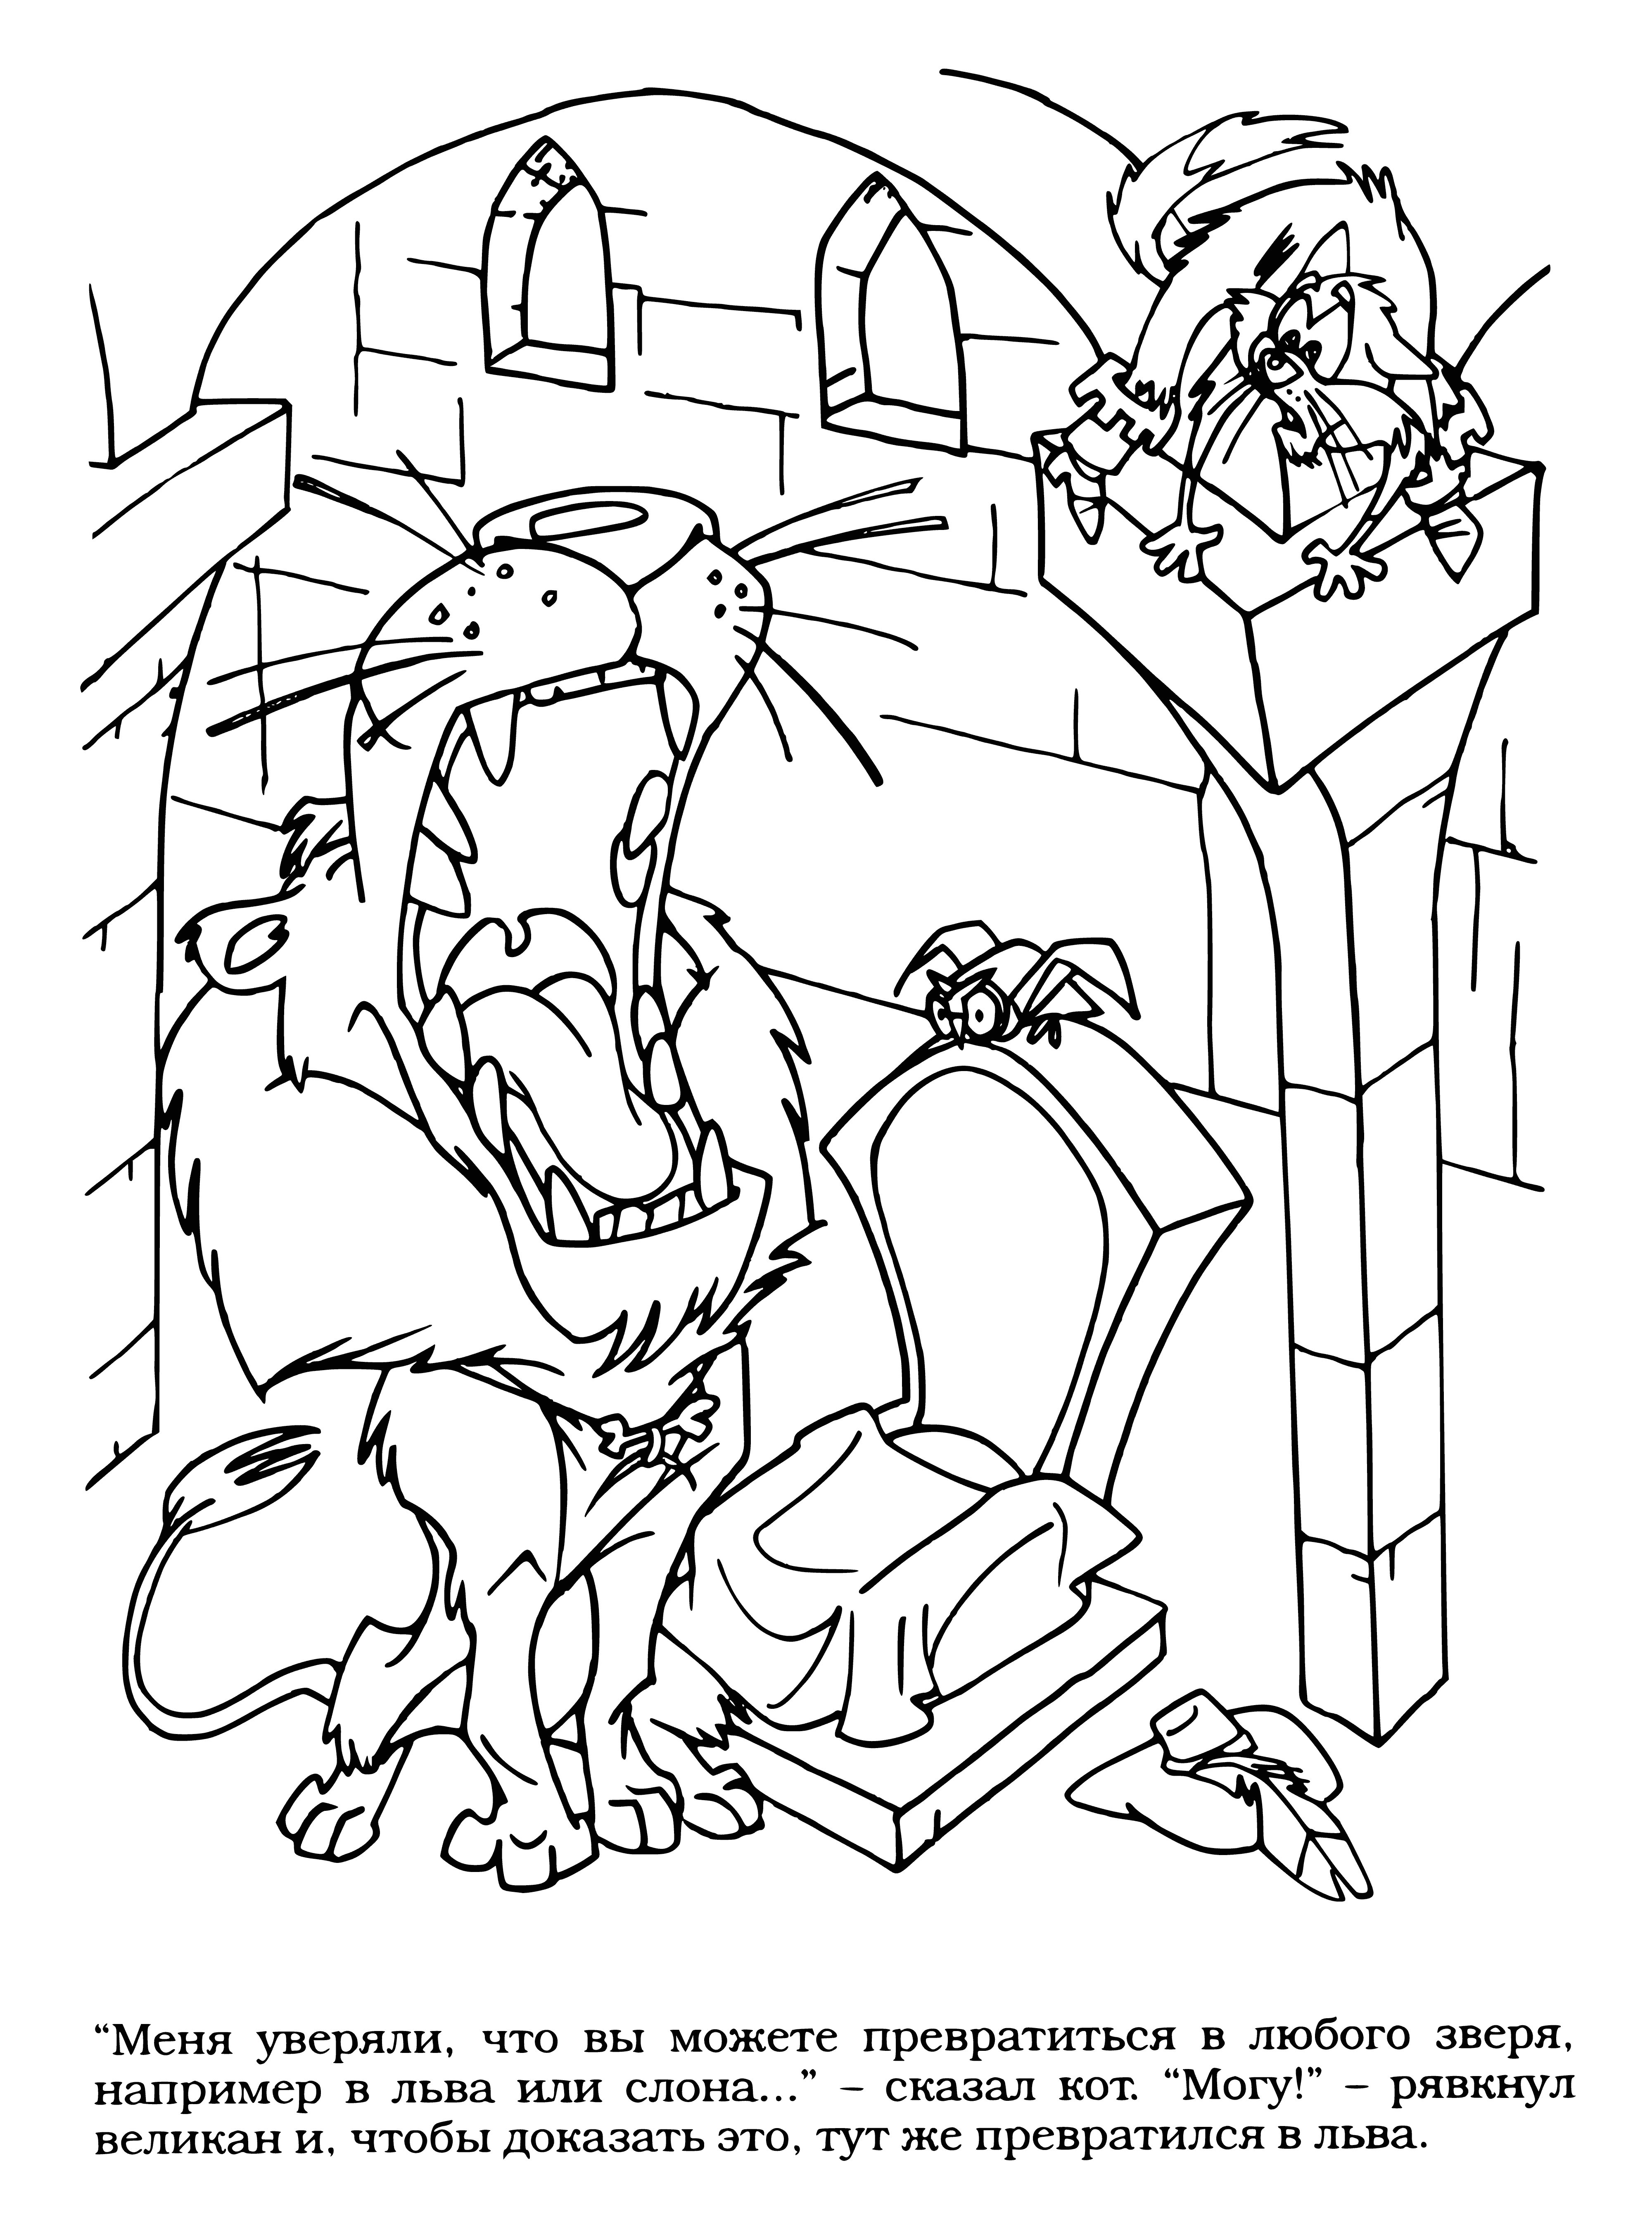 coloring page: Cannibal turned lion roars, golden fur, green eyes - he stands on hind legs in the coloring page.